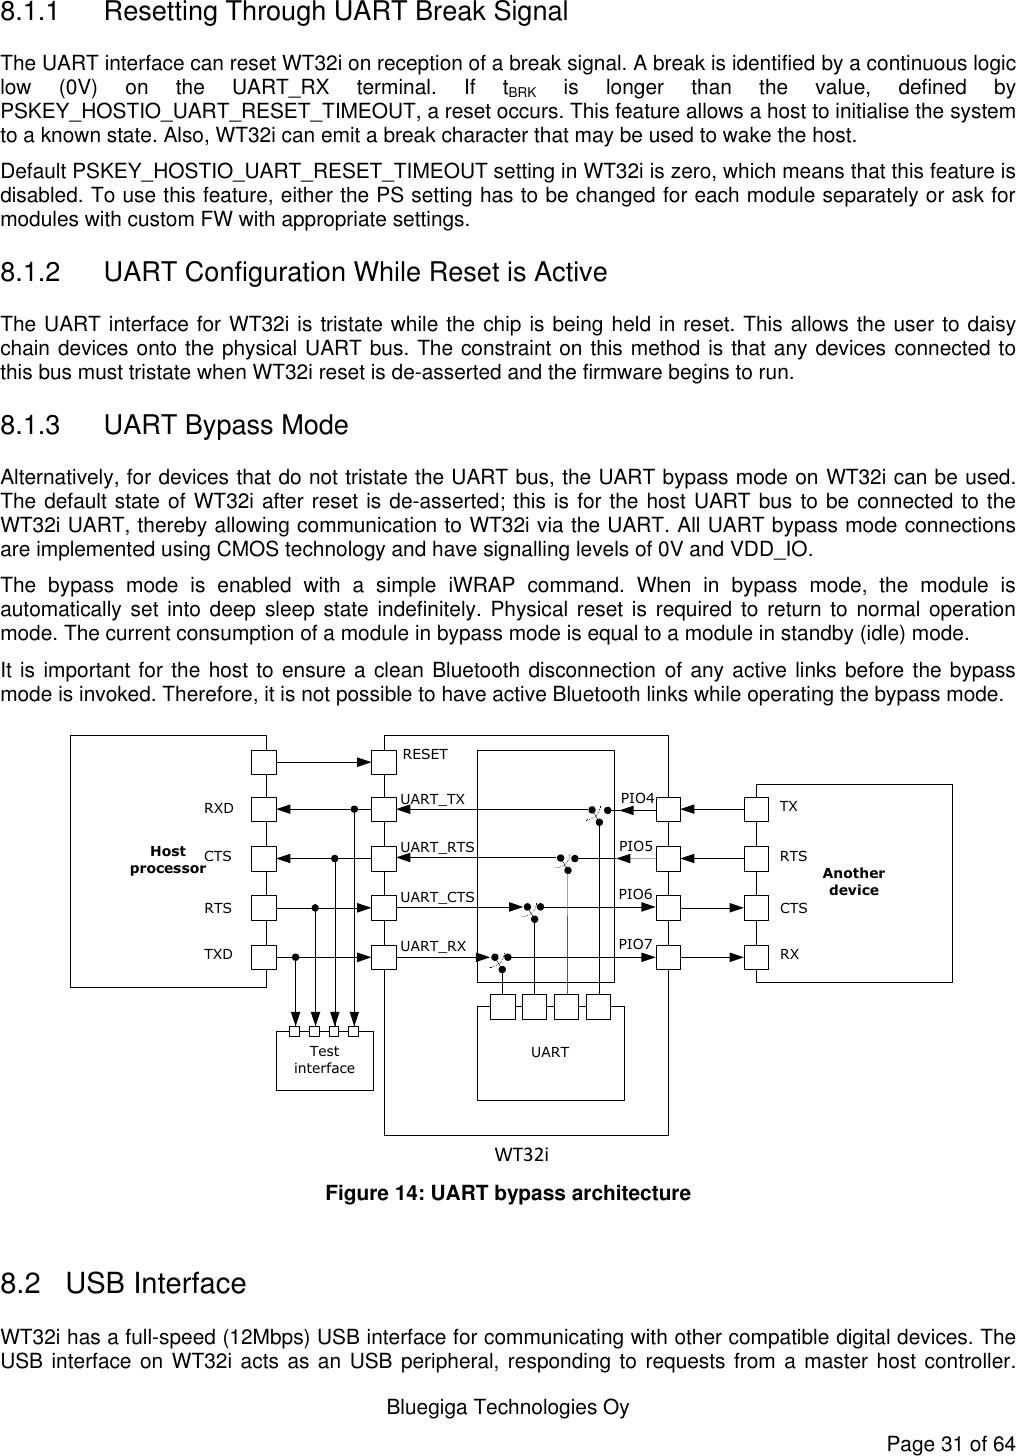   Bluegiga Technologies Oy Page 31 of 64 8.1.1  Resetting Through UART Break Signal The UART interface can reset WT32i on reception of a break signal. A break is identified by a continuous logic low  (0V)  on  the  UART_RX  terminal.  If  tBRK  is  longer  than  the  value,  defined  by PSKEY_HOSTIO_UART_RESET_TIMEOUT, a reset occurs. This feature allows a host to initialise the system to a known state. Also, WT32i can emit a break character that may be used to wake the host. Default PSKEY_HOSTIO_UART_RESET_TIMEOUT setting in WT32i is zero, which means that this feature is disabled. To use this feature, either the PS setting has to be changed for each module separately or ask for modules with custom FW with appropriate settings. 8.1.2  UART Configuration While Reset is Active The UART interface for WT32i is tristate while the chip is being held in reset. This allows the user to daisy chain devices onto the physical UART bus. The constraint on this method is that any devices connected to this bus must tristate when WT32i reset is de-asserted and the firmware begins to run. 8.1.3  UART Bypass Mode Alternatively, for devices that do not tristate the UART bus, the UART bypass mode on WT32i can be used. The default state of WT32i after reset is de-asserted; this is for the host UART bus to be connected to the WT32i UART, thereby allowing communication to WT32i via the UART. All UART bypass mode connections are implemented using CMOS technology and have signalling levels of 0V and VDD_IO. The  bypass  mode  is  enabled  with  a  simple  iWRAP  command.  When  in  bypass  mode,  the  module  is automatically set into deep  sleep state  indefinitely. Physical  reset is  required  to  return to  normal operation mode. The current consumption of a module in bypass mode is equal to a module in standby (idle) mode. It is important for the host to ensure a clean Bluetooth disconnection of any active links before the bypass mode is invoked. Therefore, it is not possible to have active Bluetooth links while operating the bypass mode. WT12HostprocessorTestinterfaceRXDCTSRTSTXDAnotherdeviceTXRTSCTSRXUART_TXUART_RTSUART_CTSUART_RXRESETPIO5PIO6PIO7PIO4UARTWTxxWT32i Figure 14: UART bypass architecture  8.2  USB Interface WT32i has a full-speed (12Mbps) USB interface for communicating with other compatible digital devices. The USB interface on WT32i acts as an USB peripheral, responding to requests from a master host controller. 